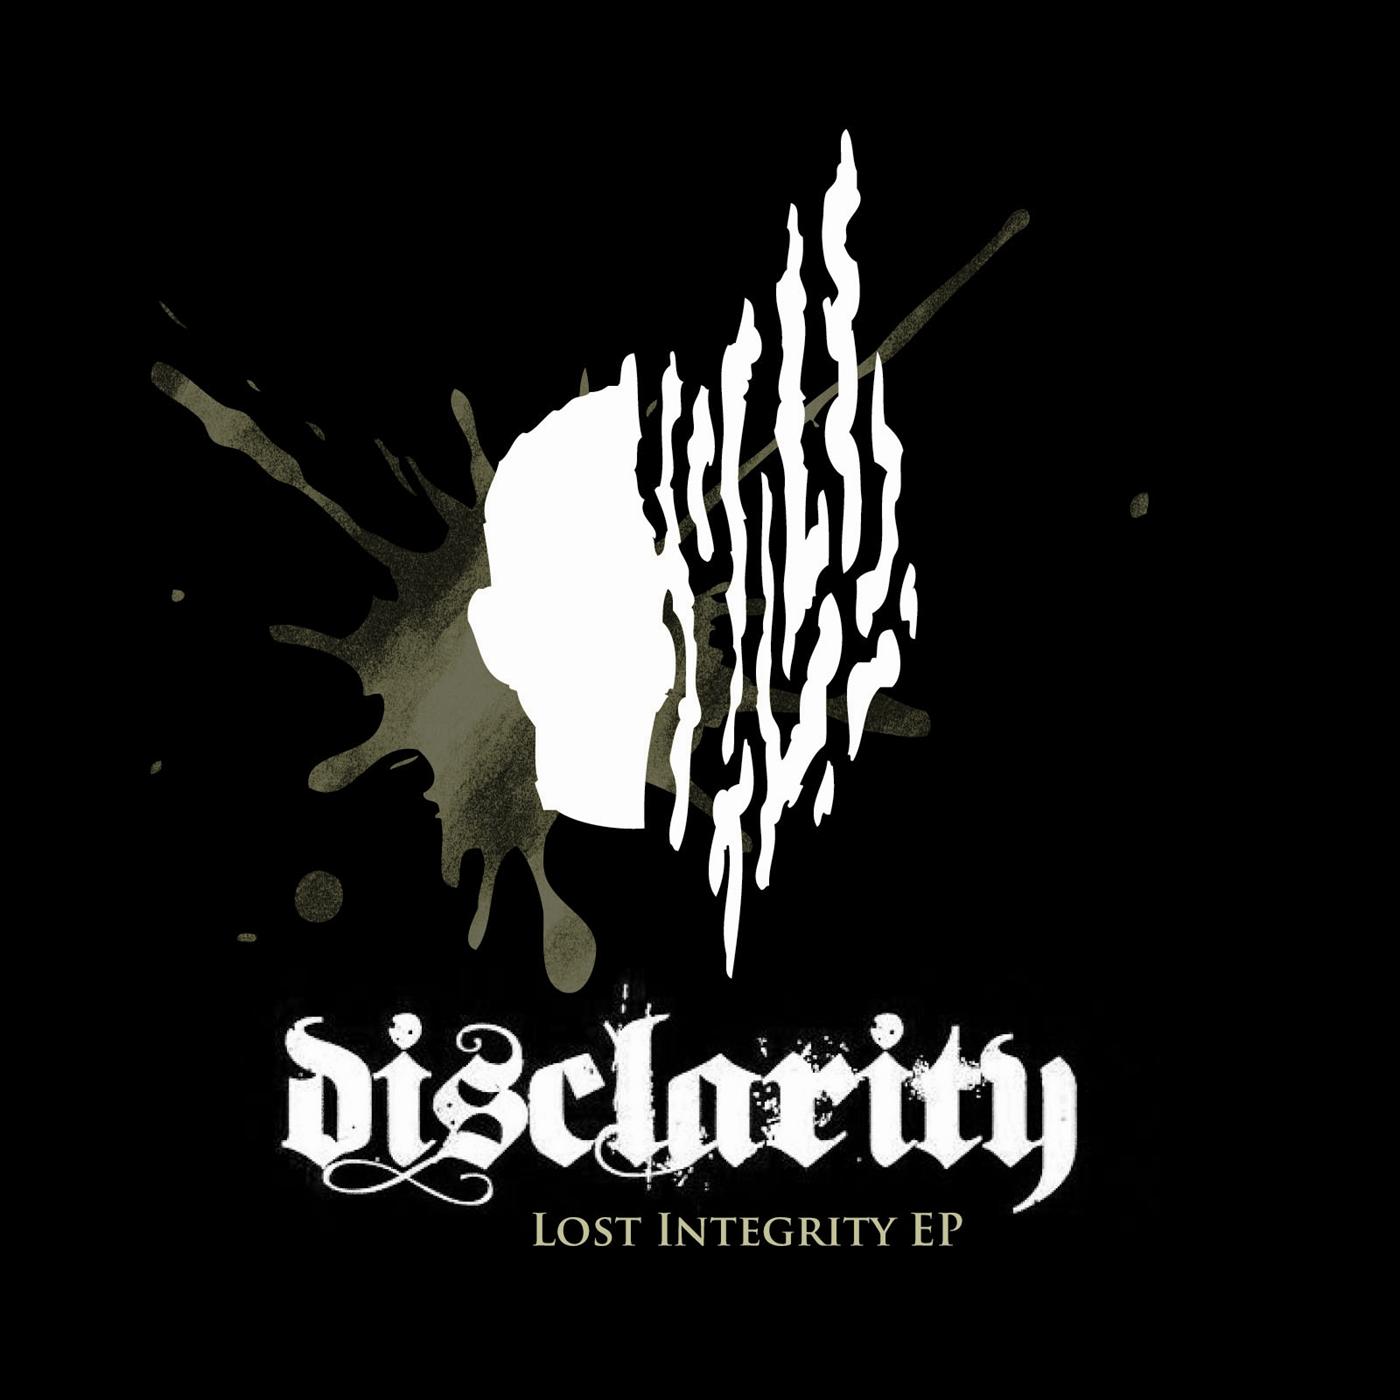 Lost Integrity EP